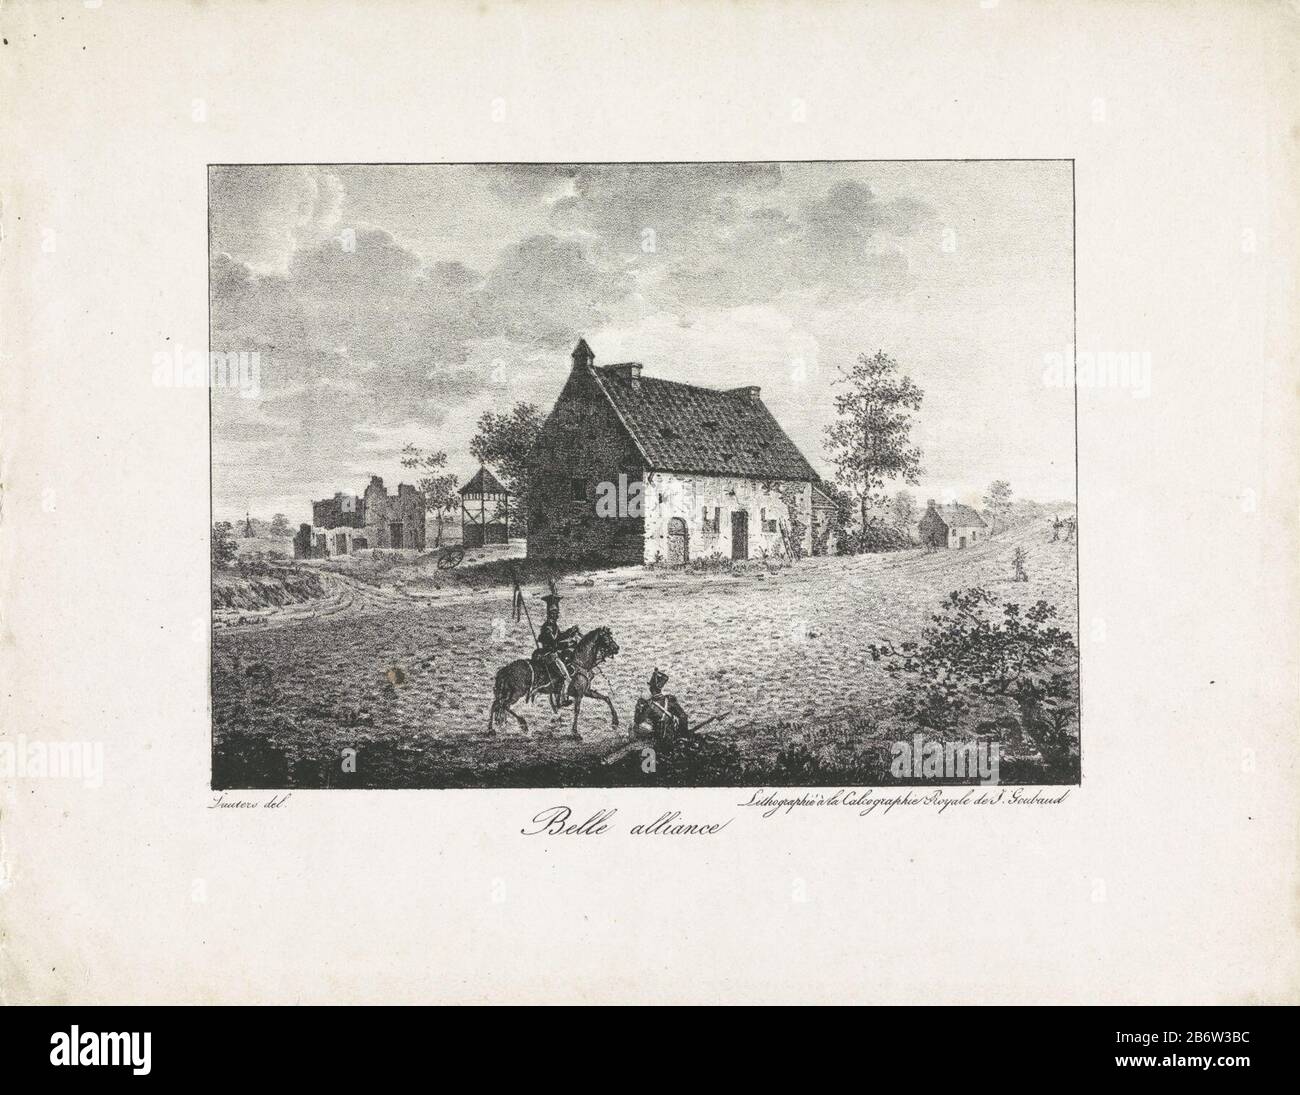 Huis La Belle Alliance Belle alliance (titel op object) The inn La Belle Alliance located in the village of Plancenoit near the battlefield of the Battle of Waterloo on 18 June 1815. two soldiers on the front, one on horseback, the other sitting on the grond. Manufacturer : printmaker, Paul Lauters (listed building) printer: Calcographie Royale J. Goubaud (listed property) Place manufacture: Belgium Date: 1820 - 1850 Physical features: lithography material: paper technique: lithography (technique) Dimensions: sheet: h 238 mm × W 304 mm Subject: devastated, ruined place or city ( warfare) Batt Stock Photo